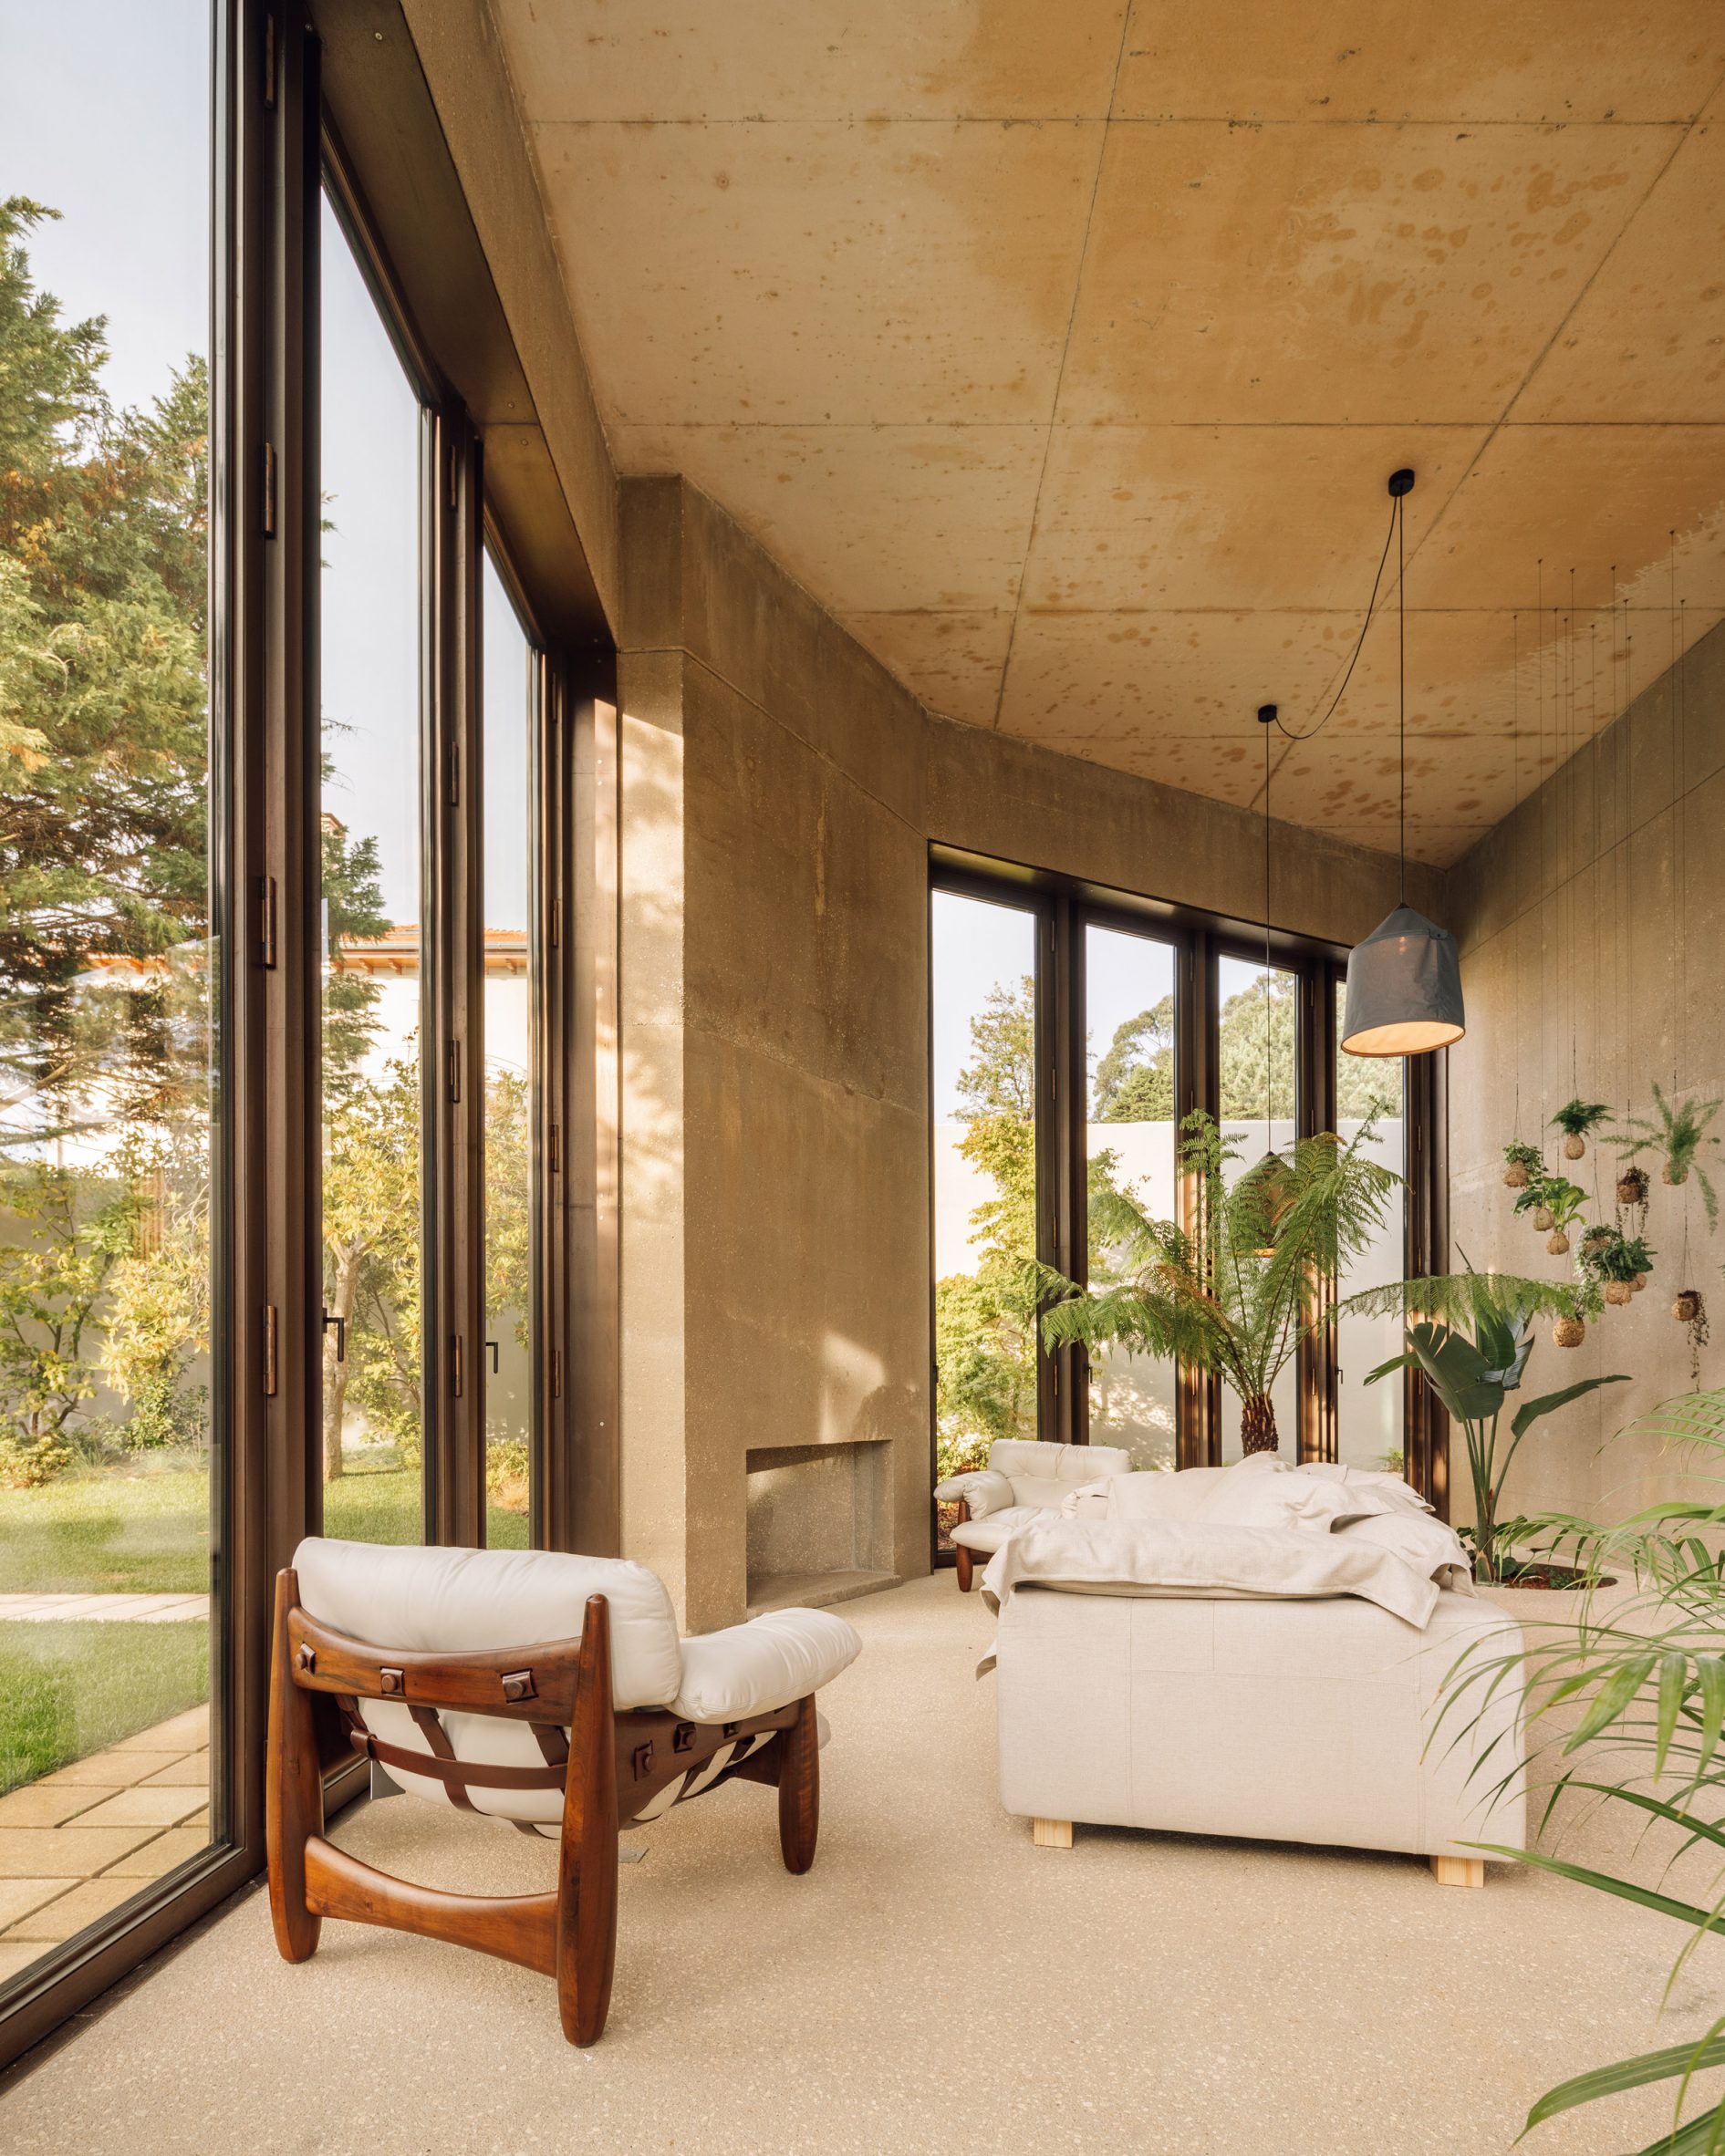 Living room of Casa 2 Porto by Bak Gordon Arquitectos with concrete walls and beige soft furnishings